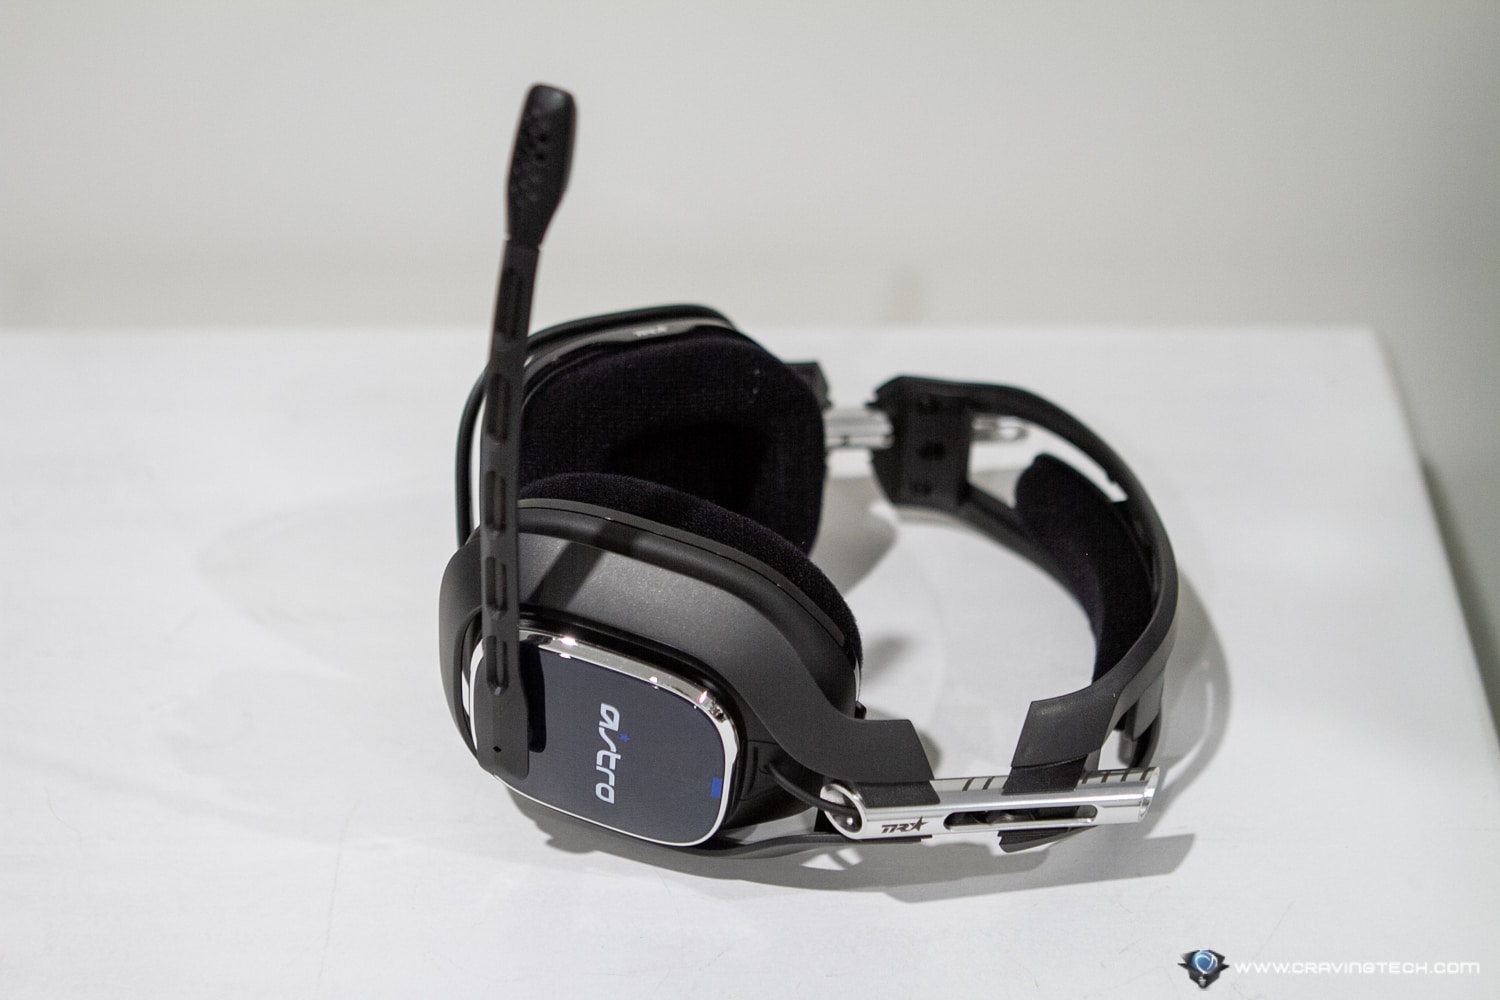 Tournament-ready gaming headset - ASTRO A40 TR Gaming Headset & MixAmp